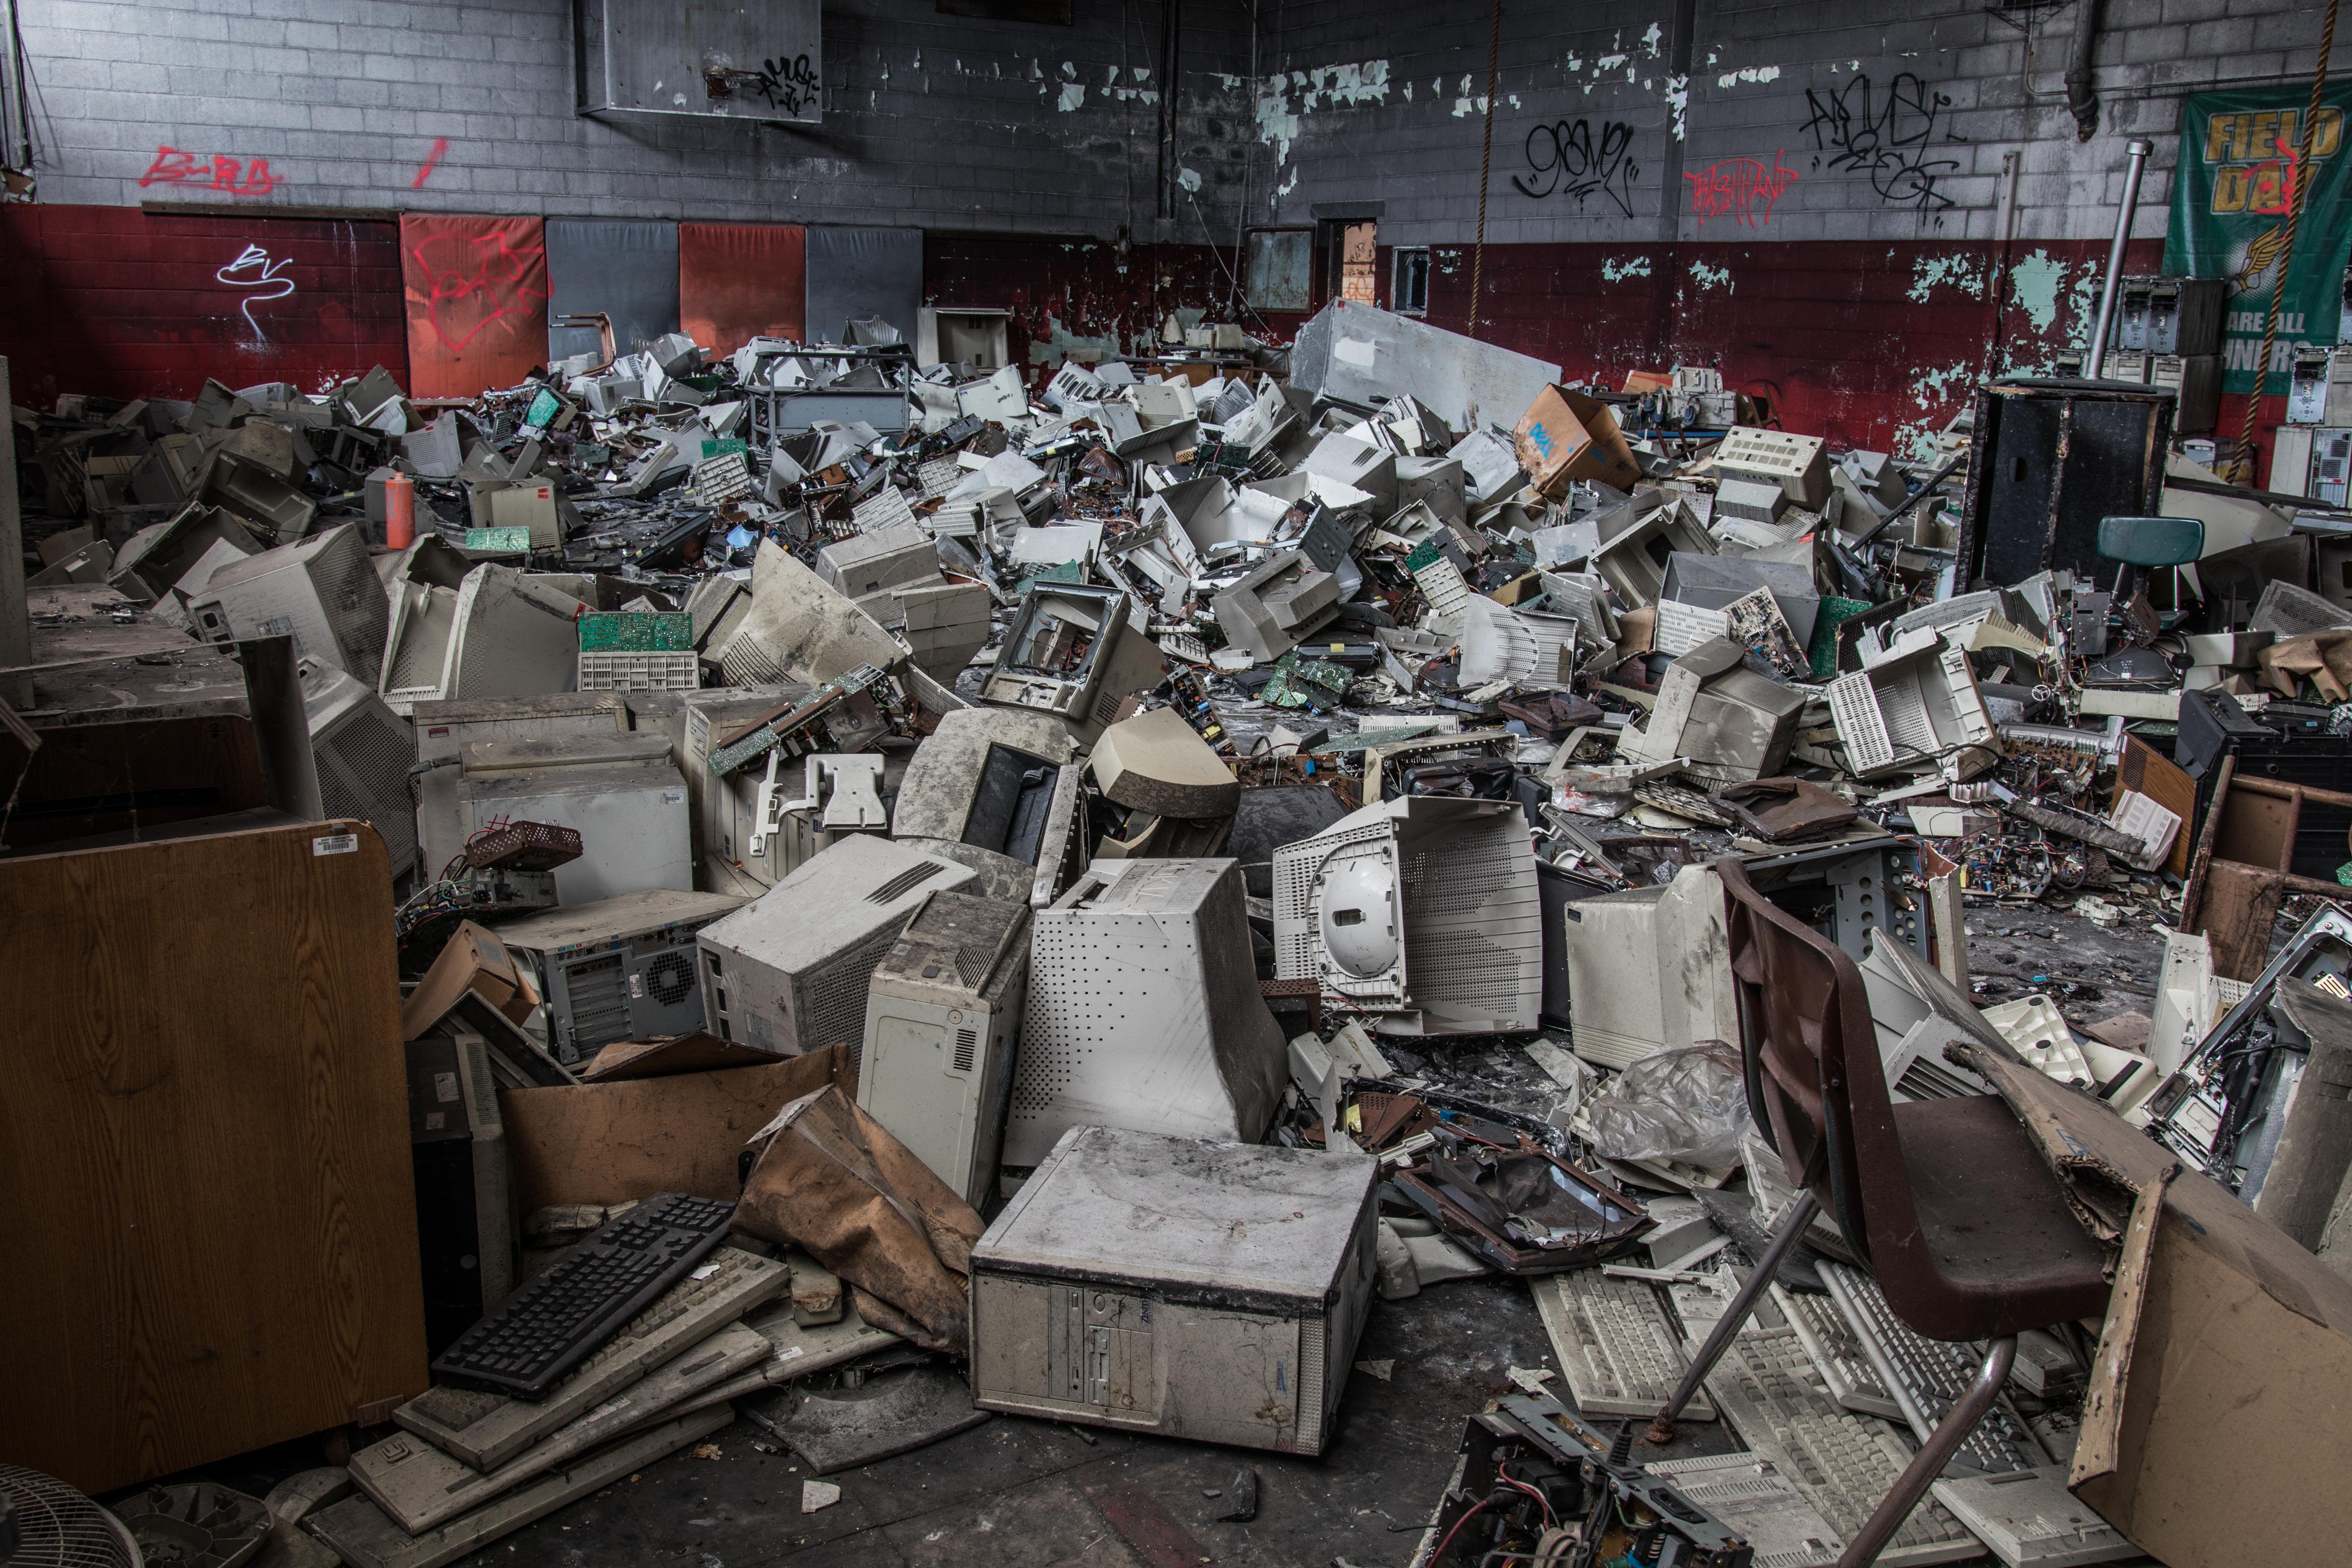 Room filled with e-waste in an abandoned building